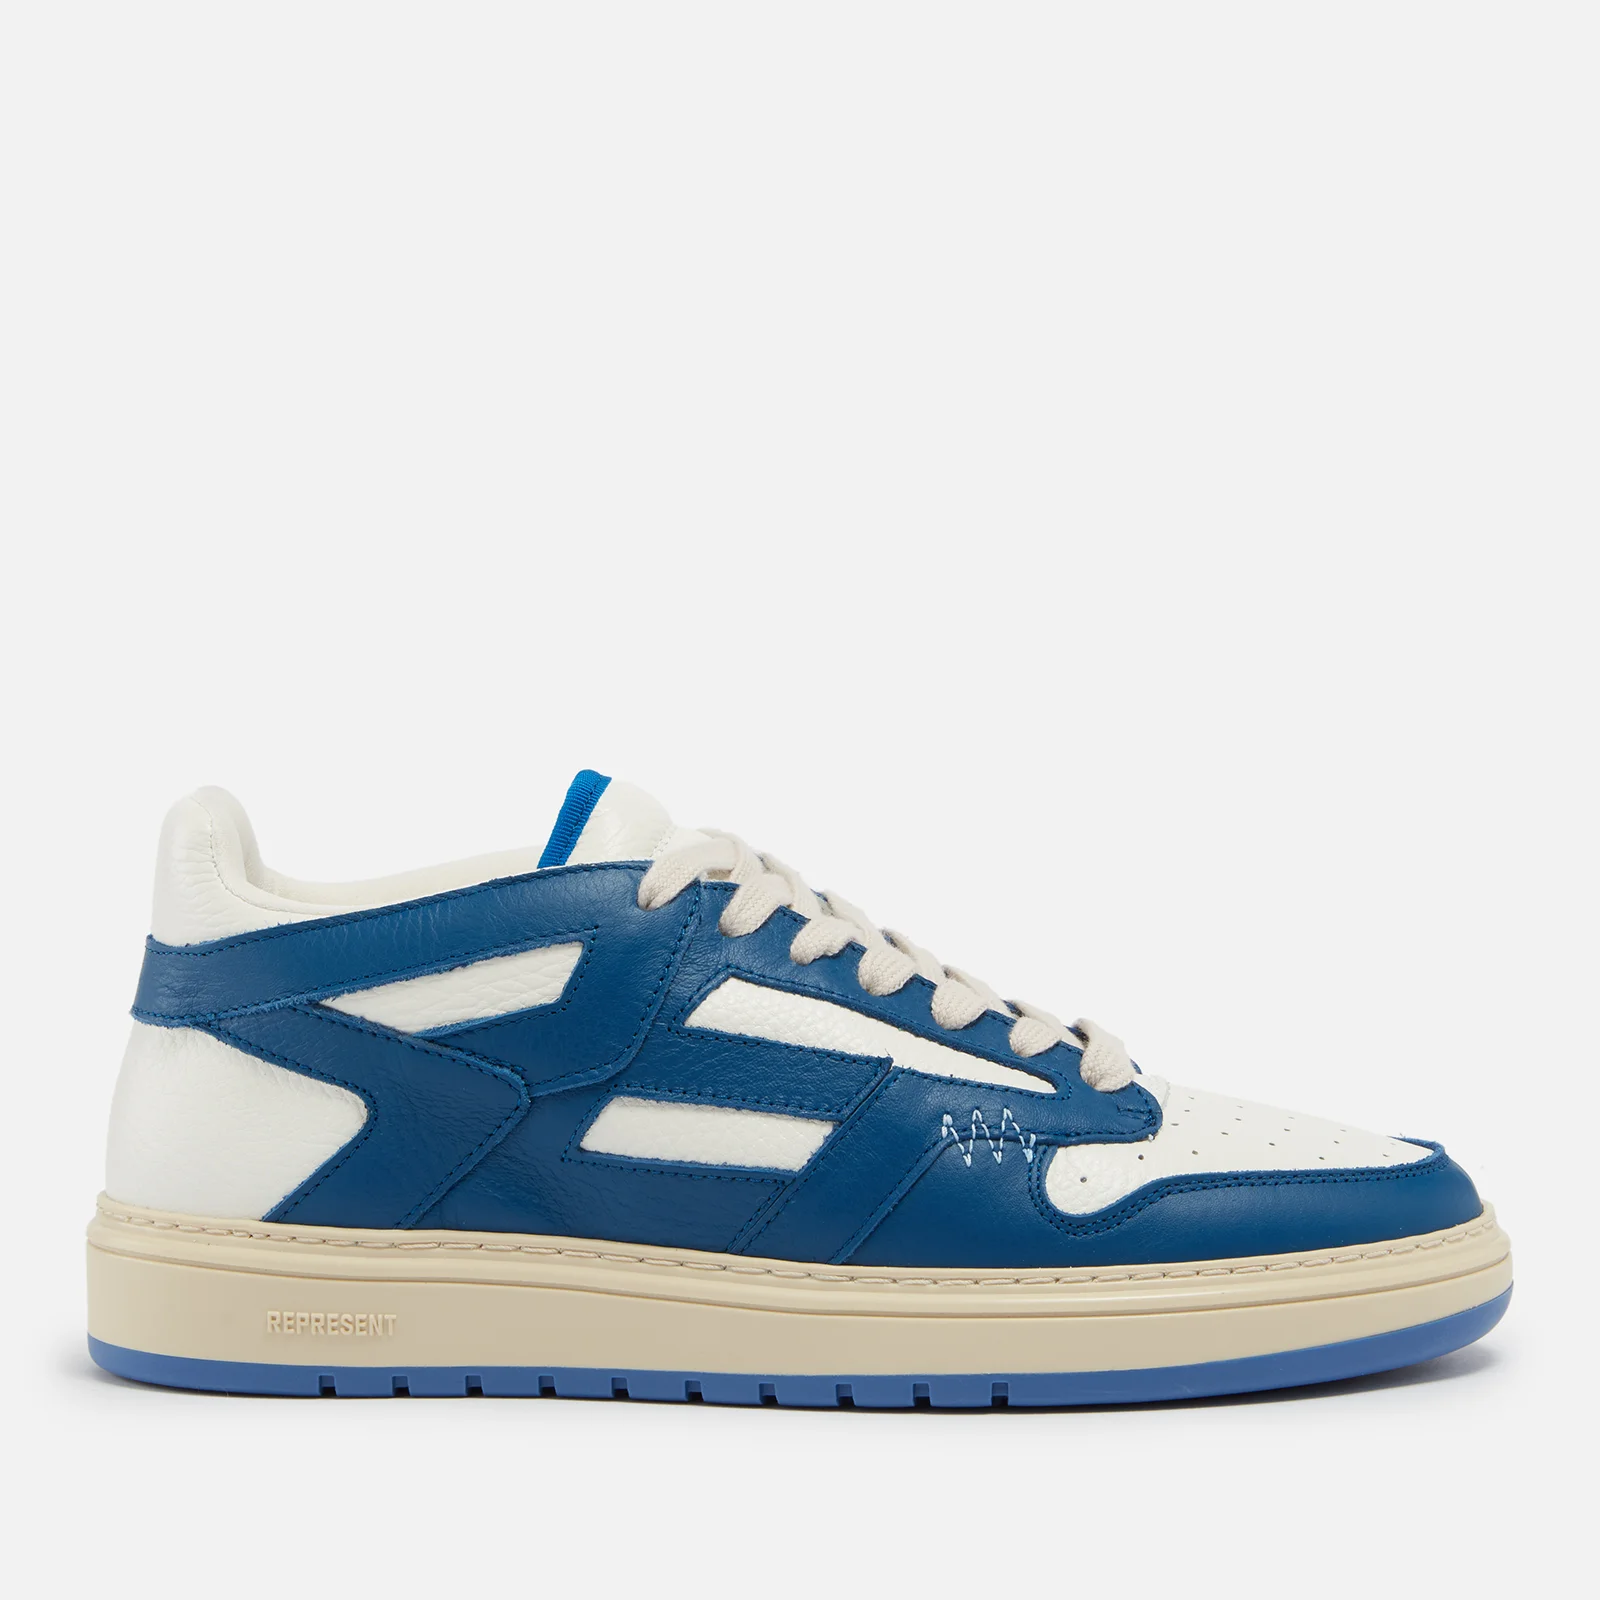 REPRESENT Reptor Men's Leather Trainers Image 1